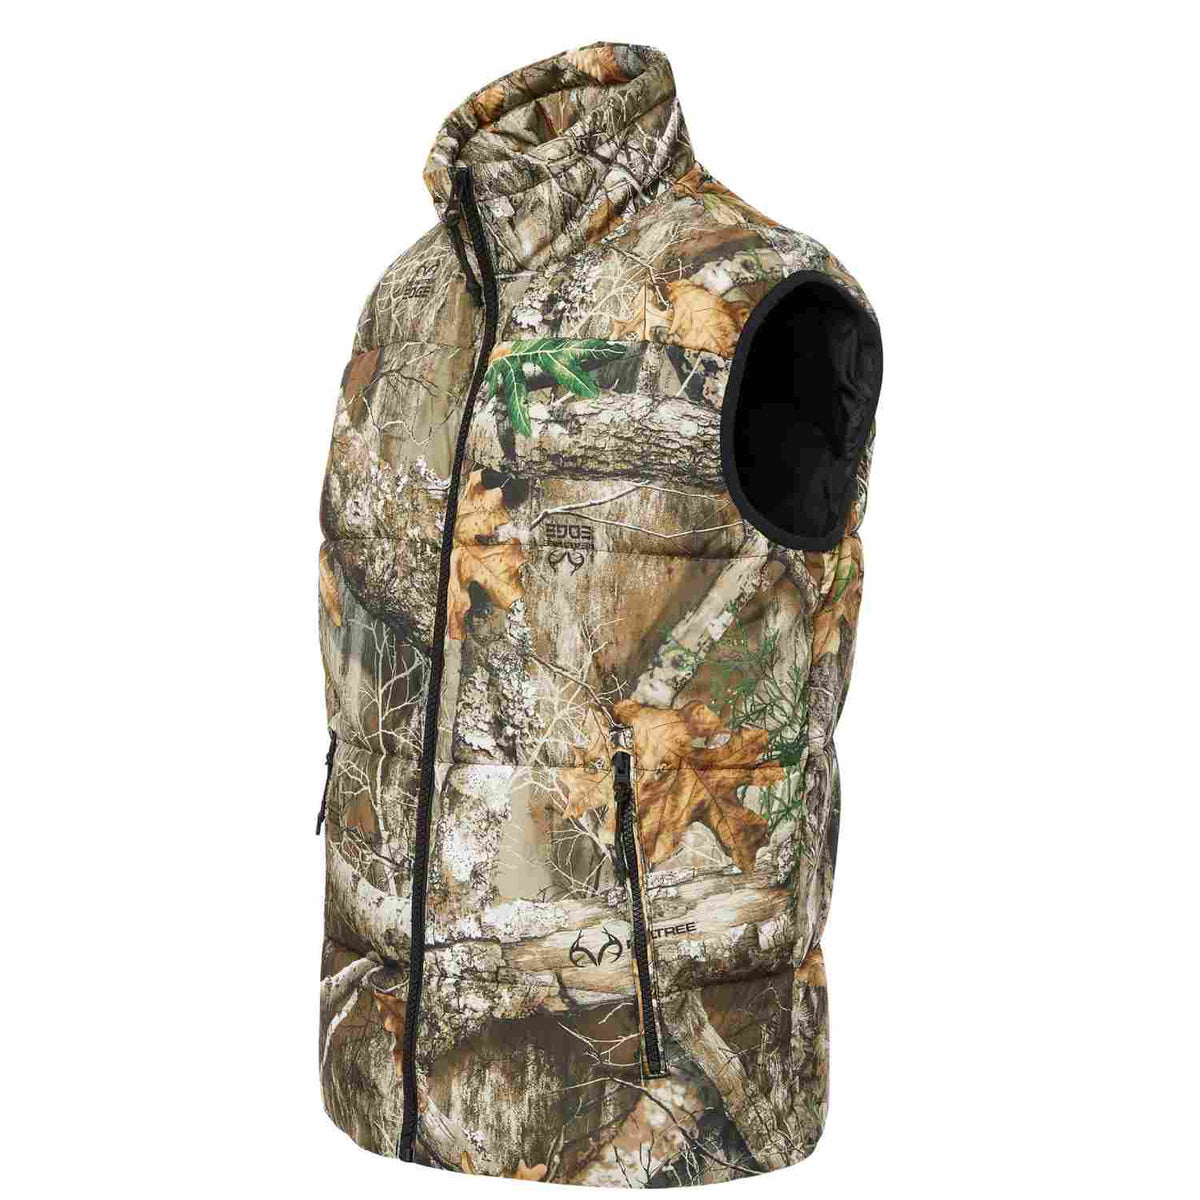  The Very Warm - Camo Poly Filled Puffer Vest